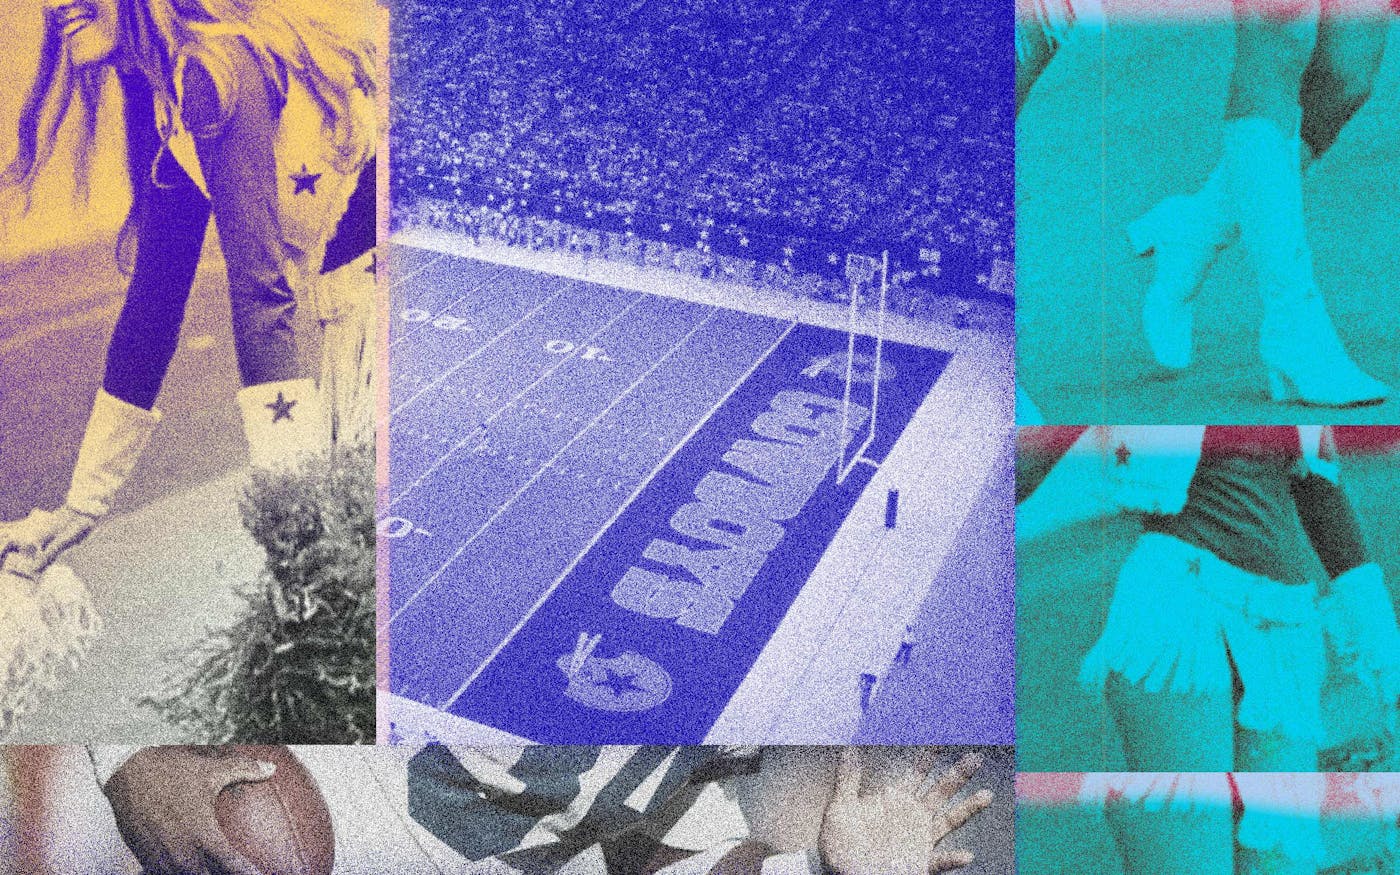 THE SPORTS REVOLUTION: HOW TEXAS CHANGED THE CULTURE OF AMERICAN ATHLETICS